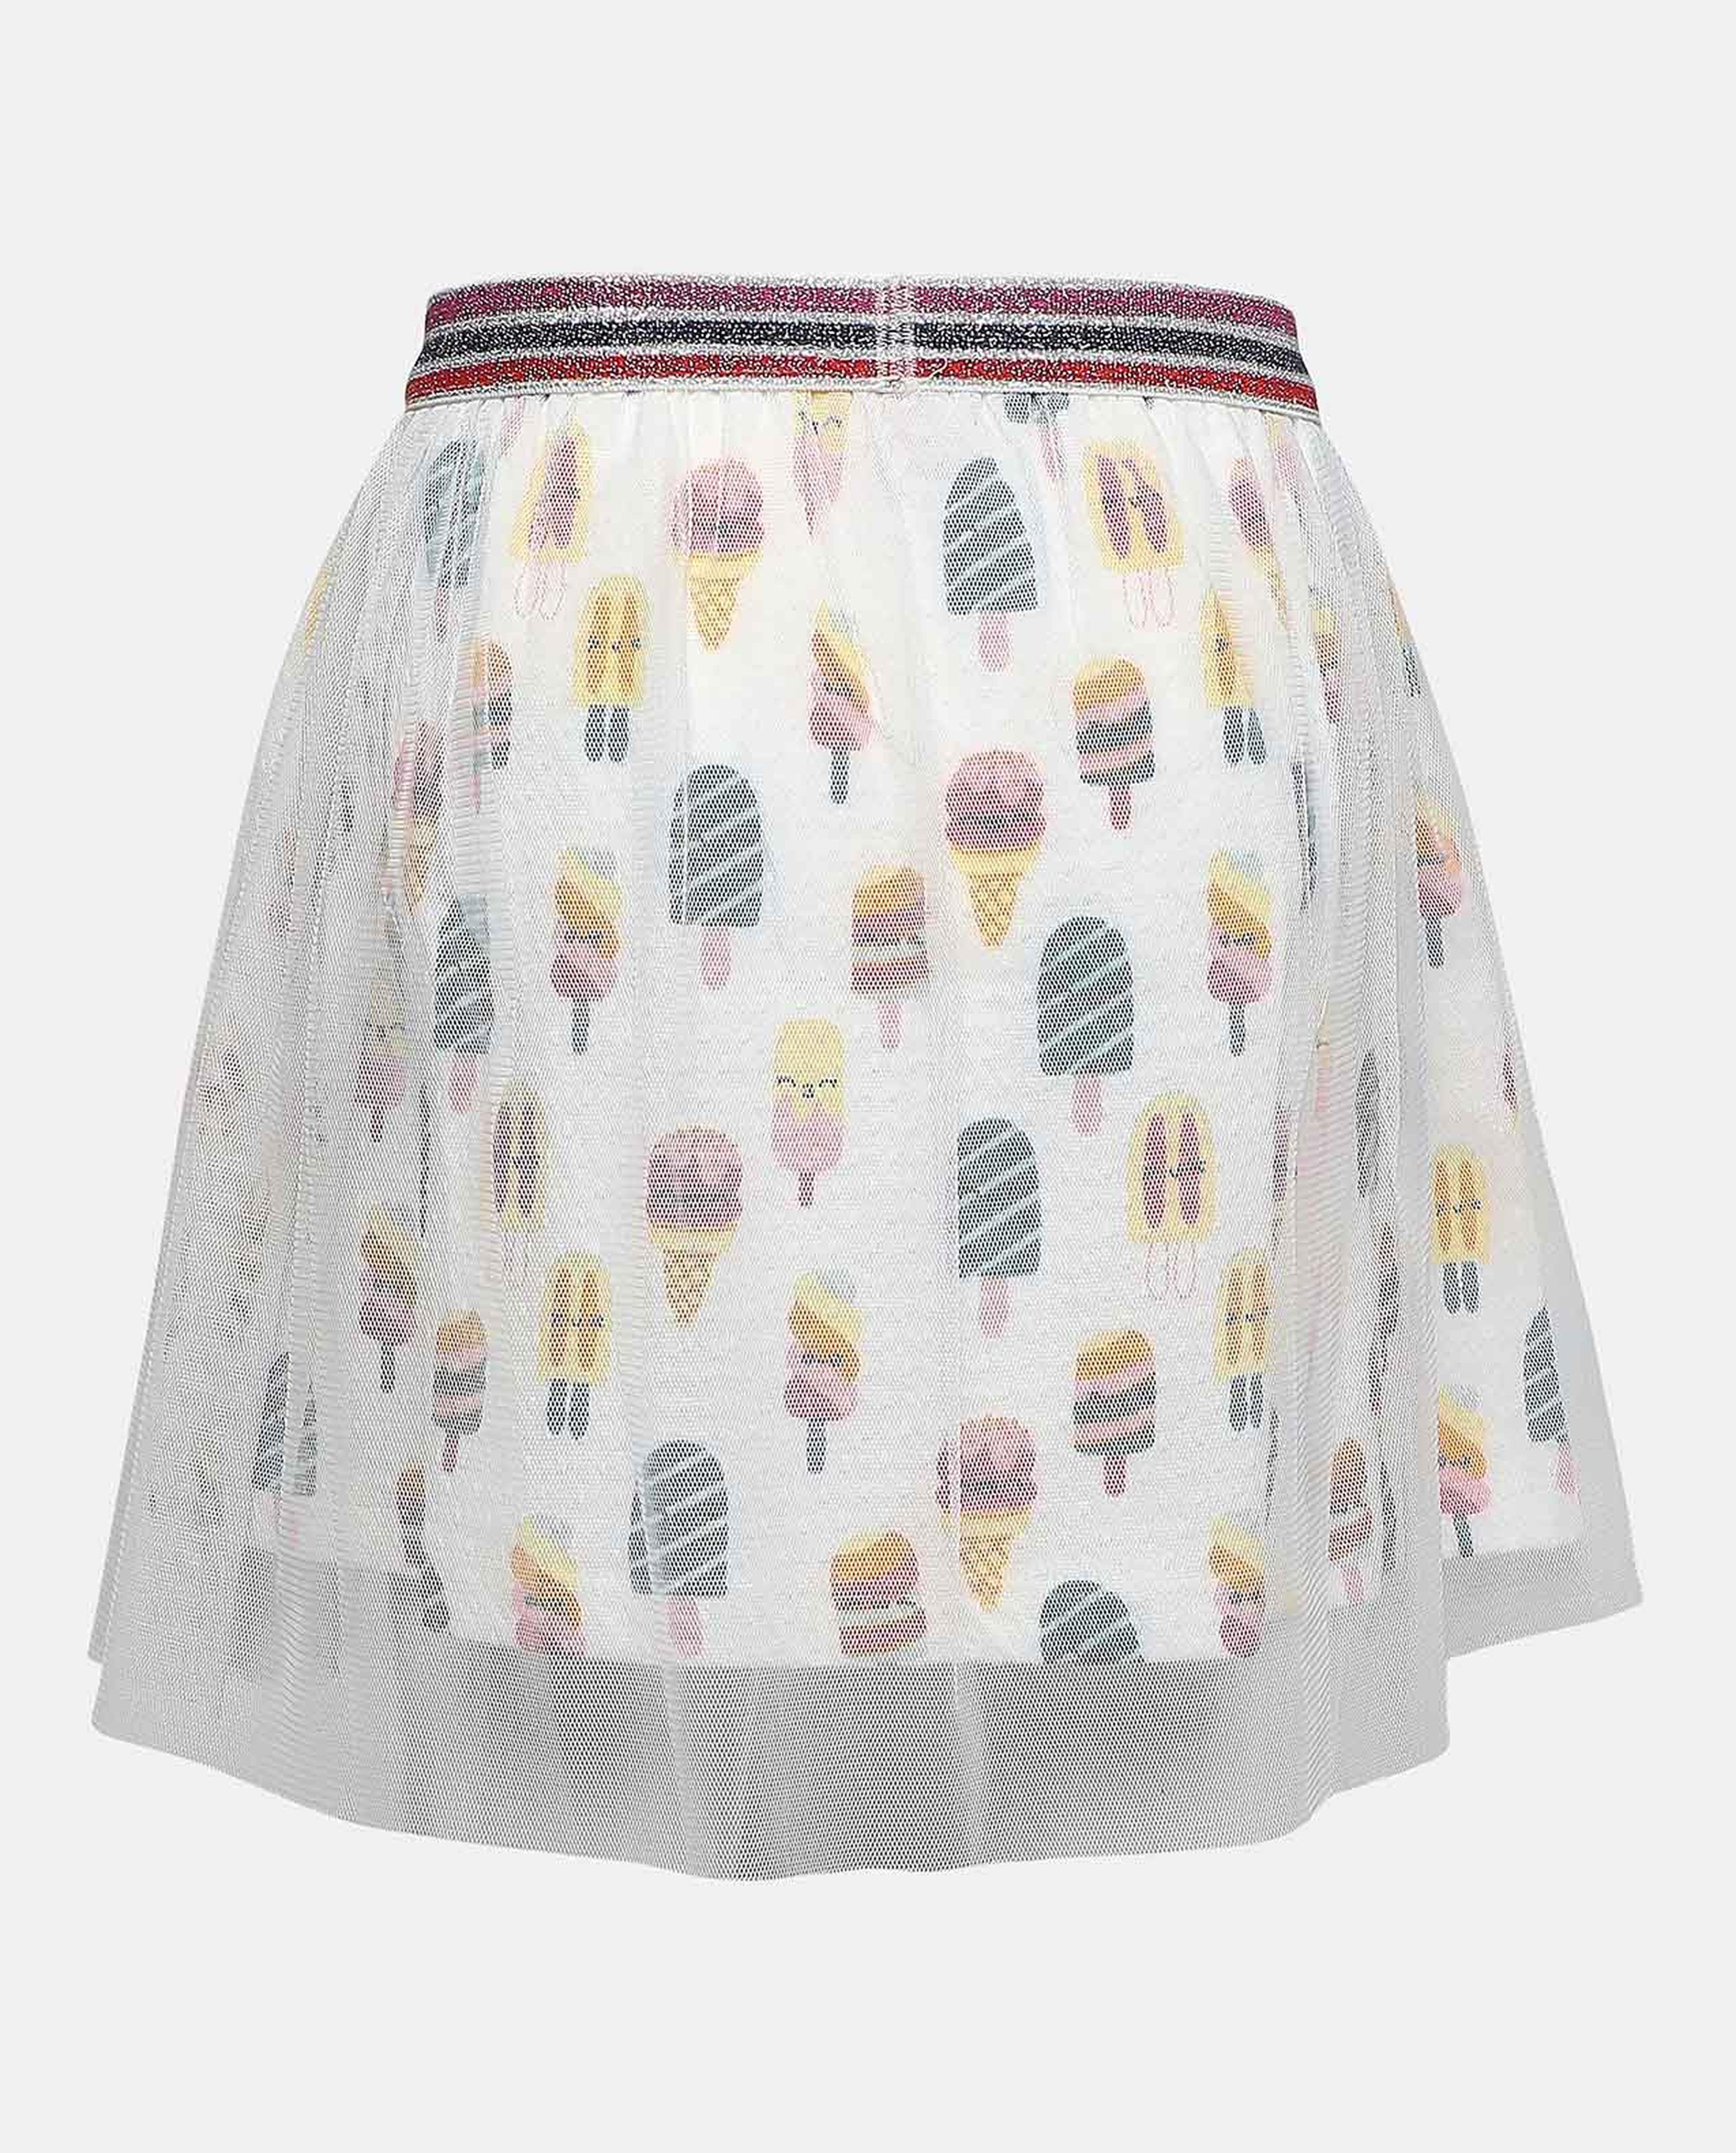 Printed Knit Skirt with Elasticated Waistband